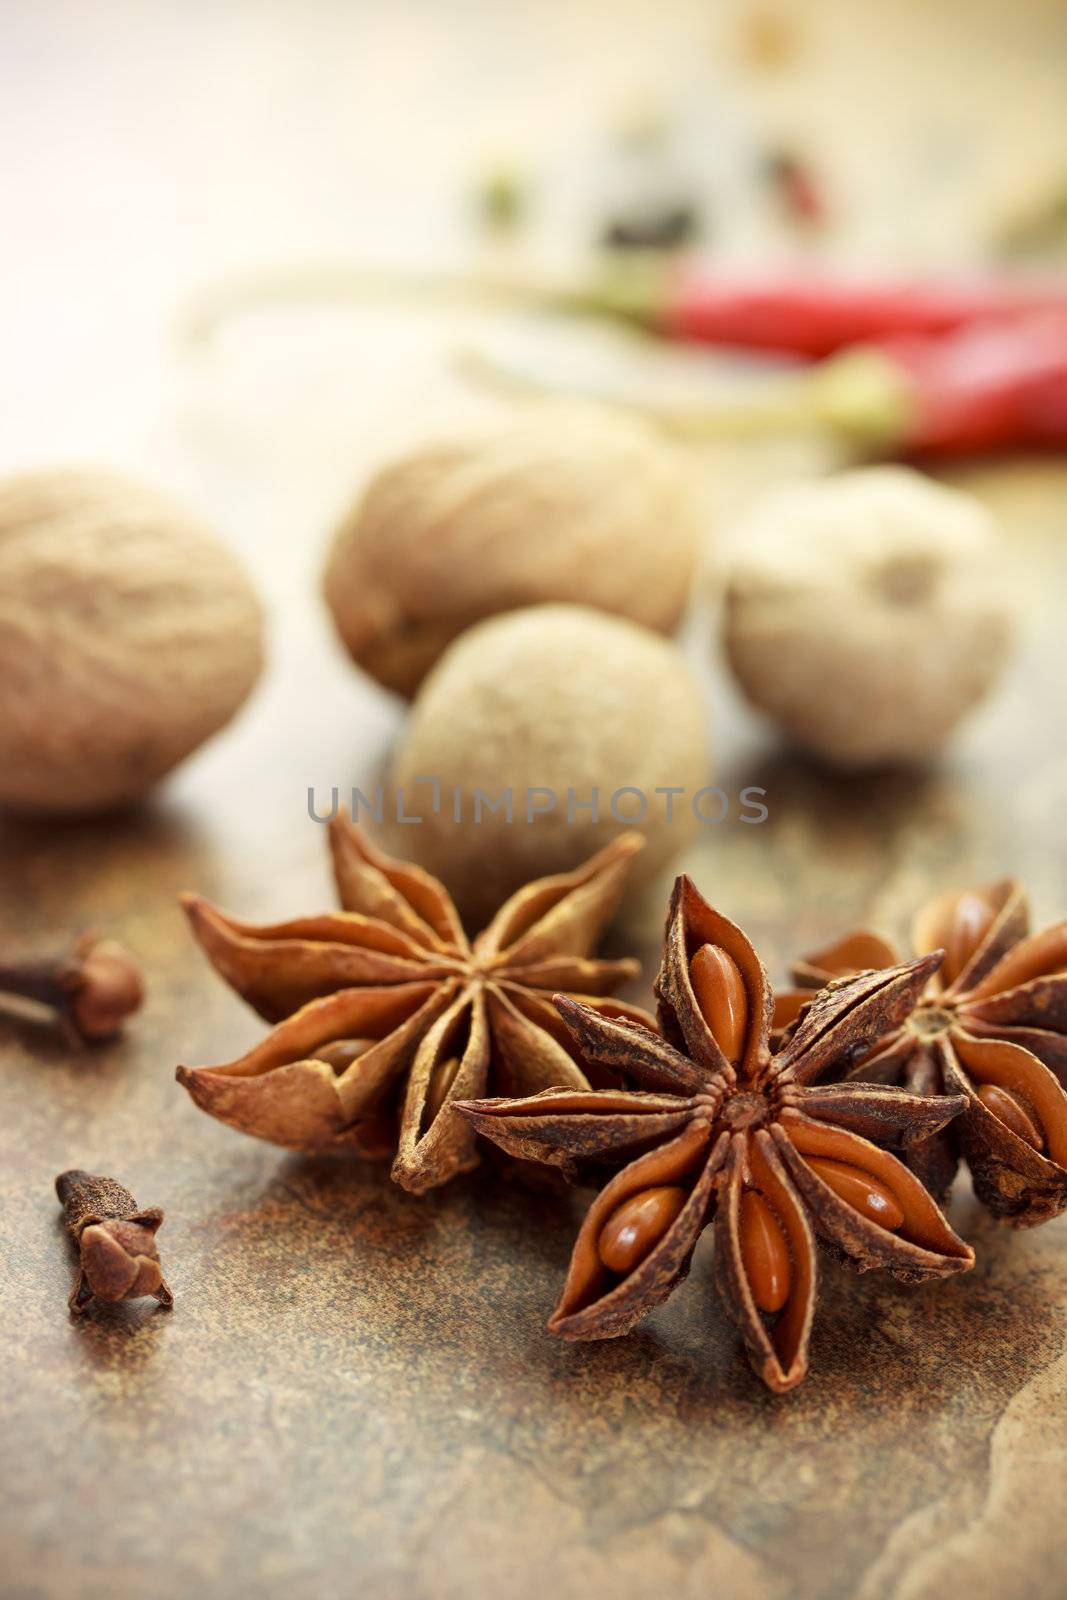 Collection of spices - star anise, nutmegs, cloves, chili peppers and corn peppers